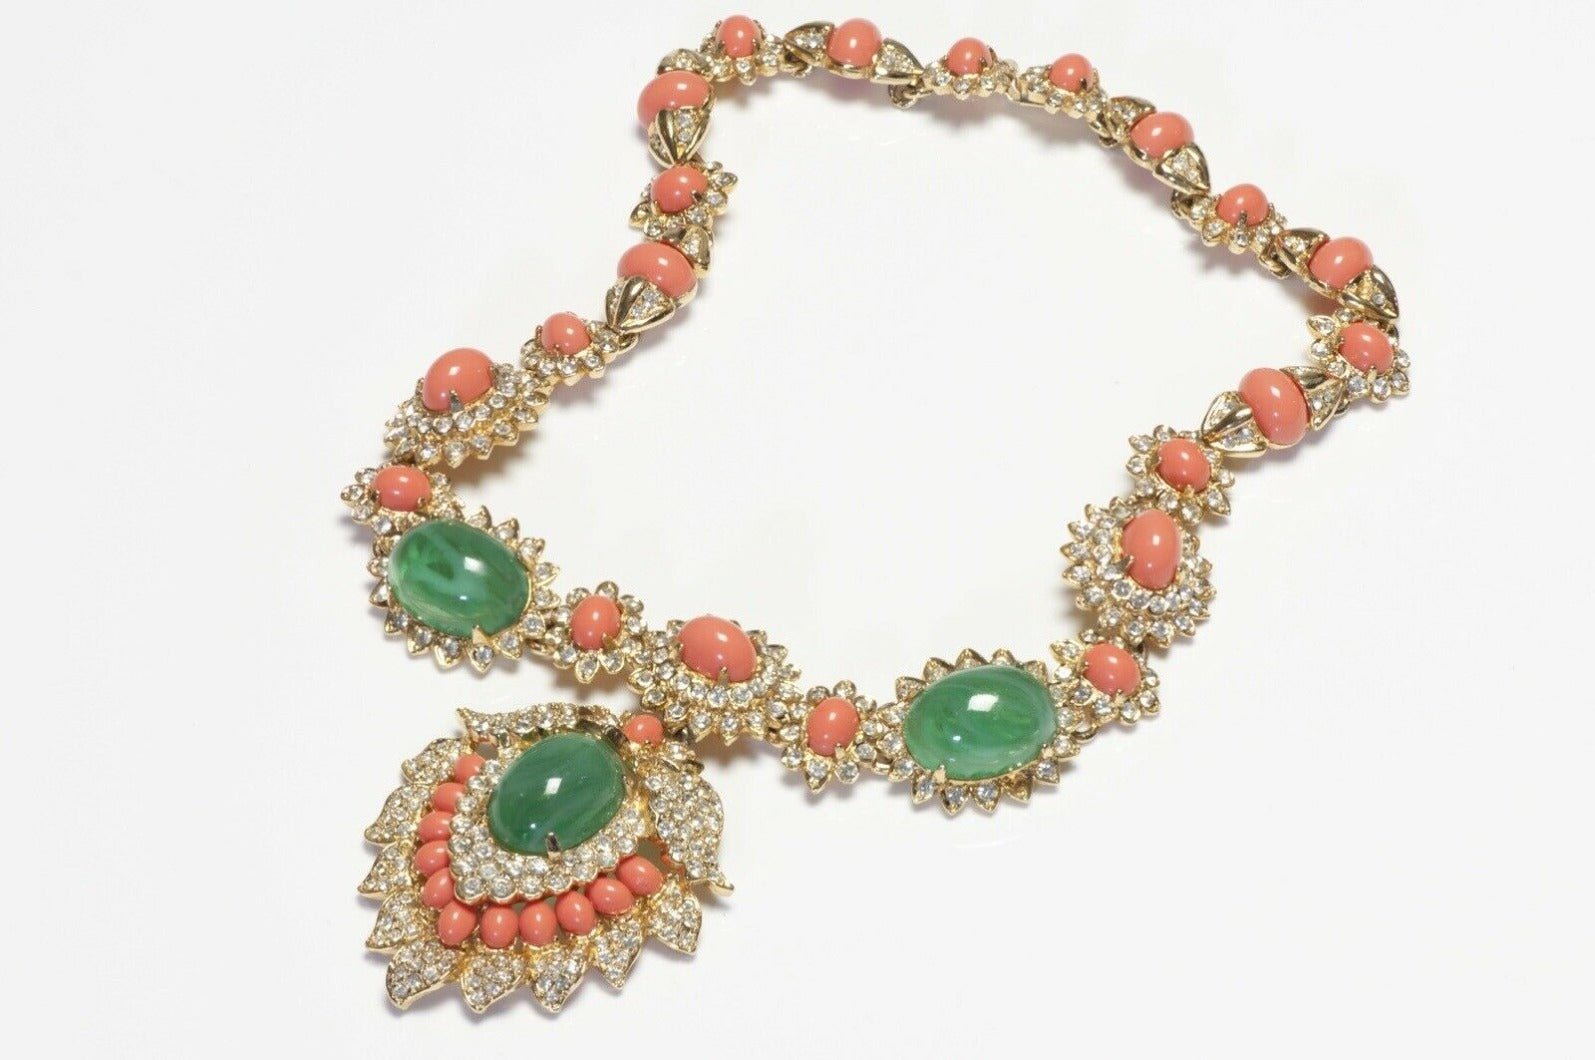 Kenneth Jay Lane Green Cabochon Glass Mughal Style Necklace